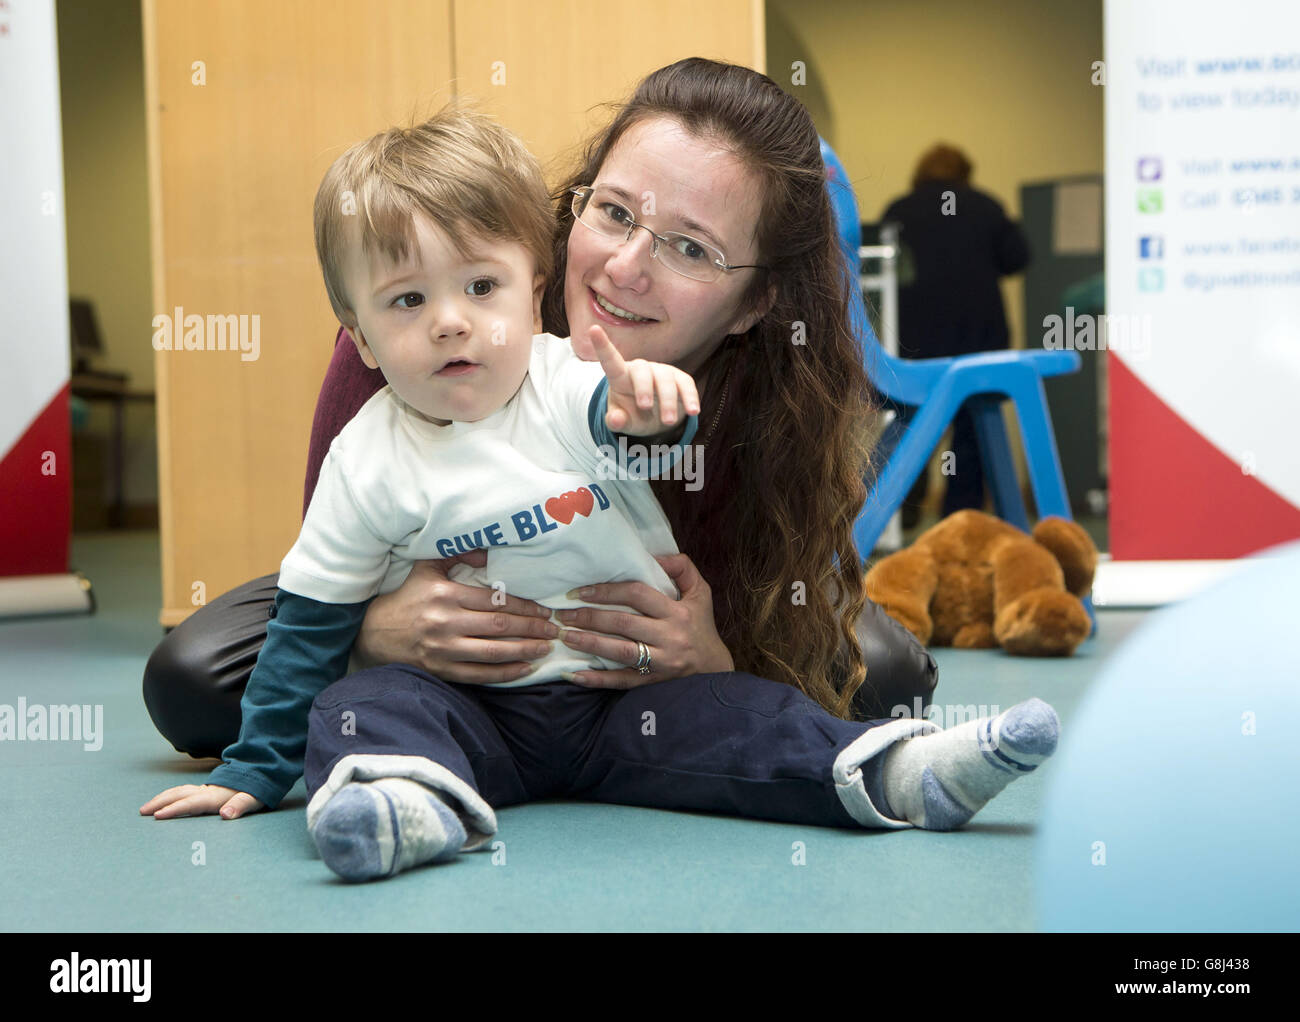 Sian Waugh and her 18-month-old son Conan Waugh, whose life was saved by a blood transfusion as they encouraging people to make giving blood their new year resolution during a photocall at the Glasgow Donor Centre. Stock Photo